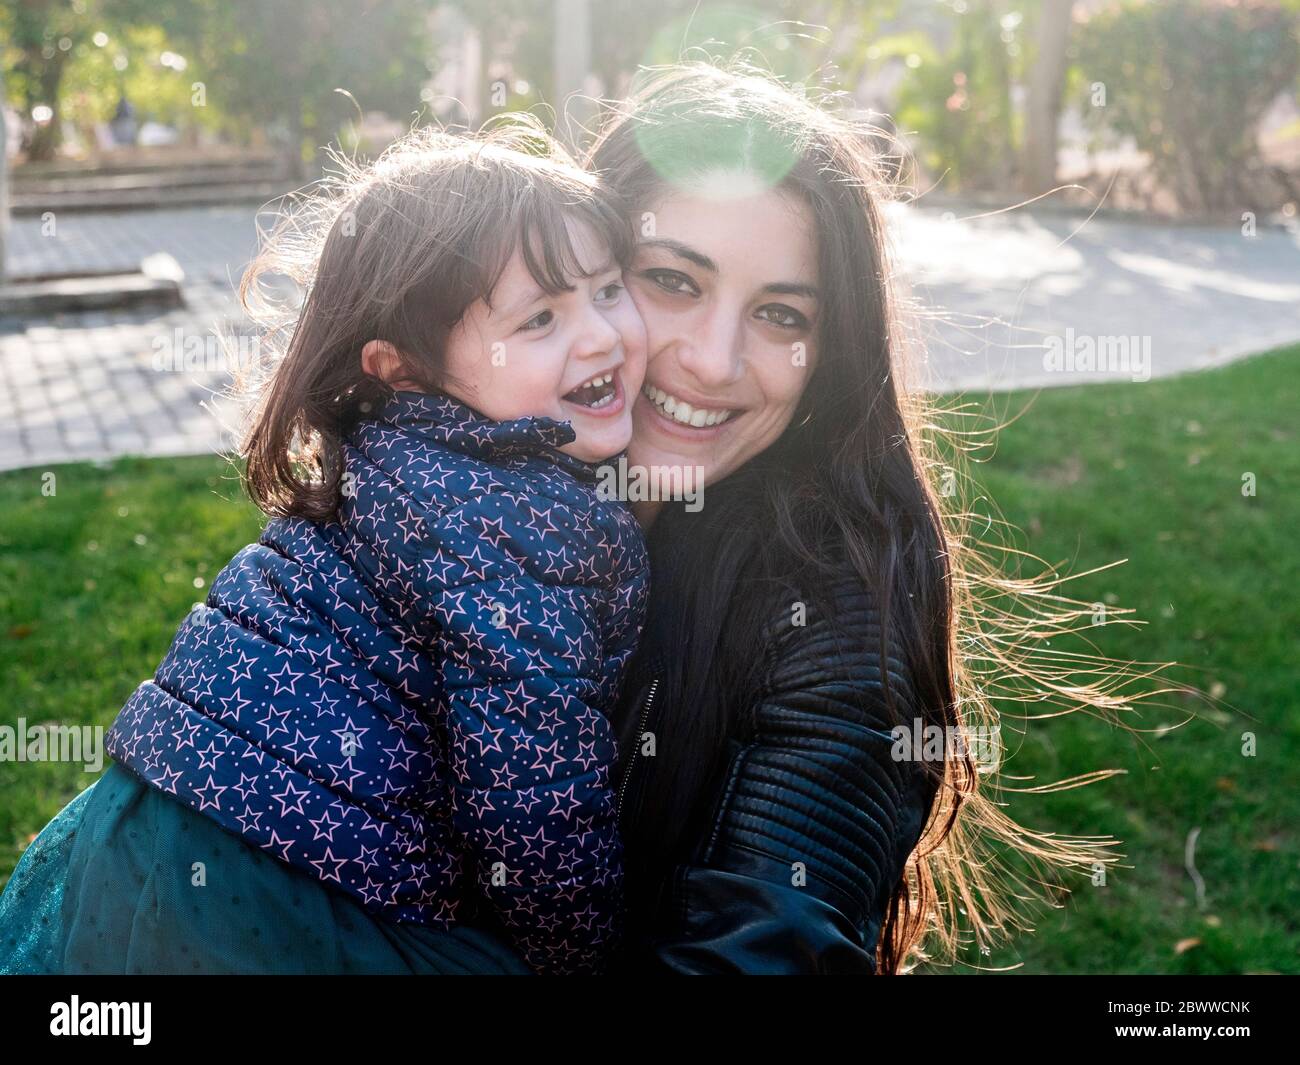 Portrait of happy little girl face to face with her mother outdoors Stock Photo